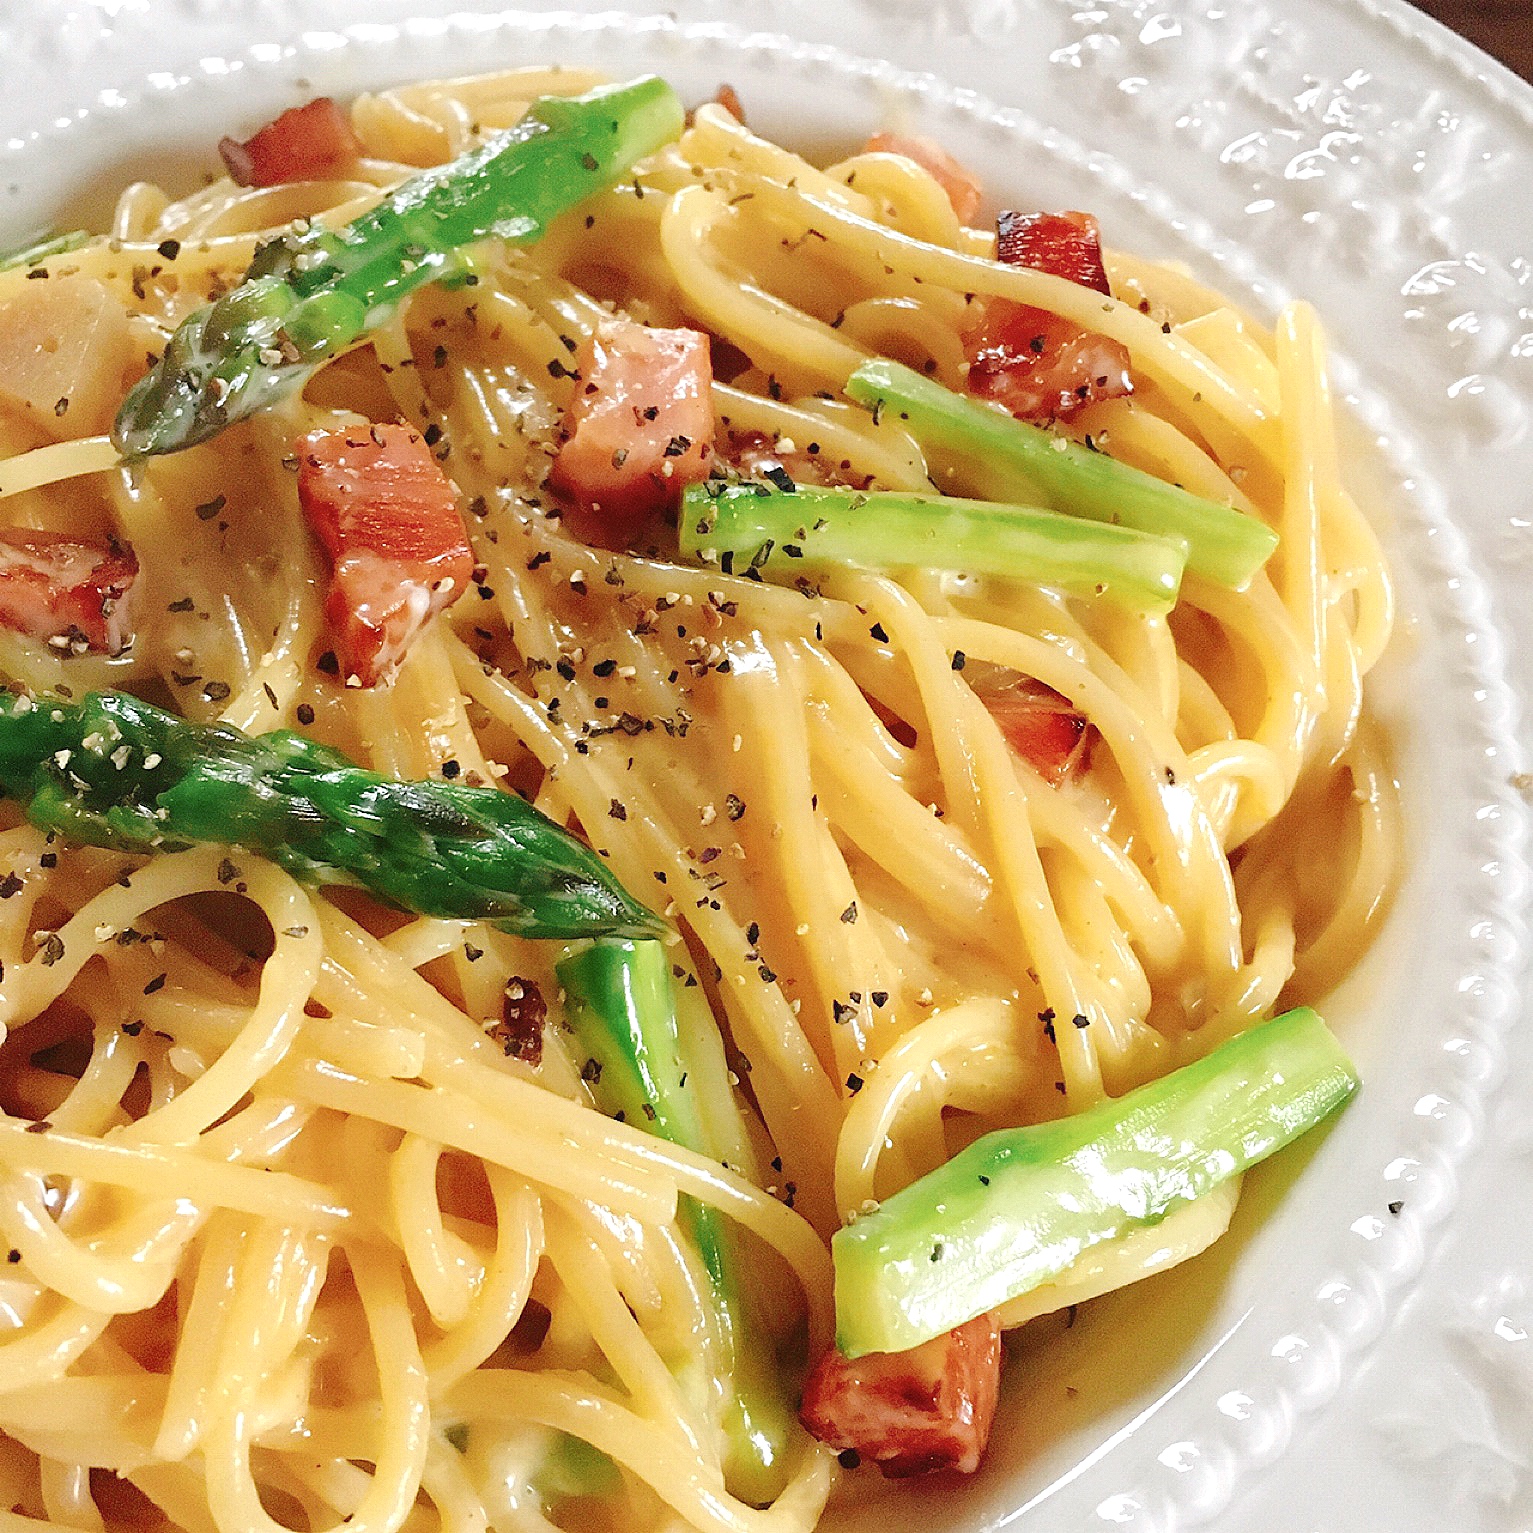 It’s an easy carbonara recipe that uses sliced cheese.